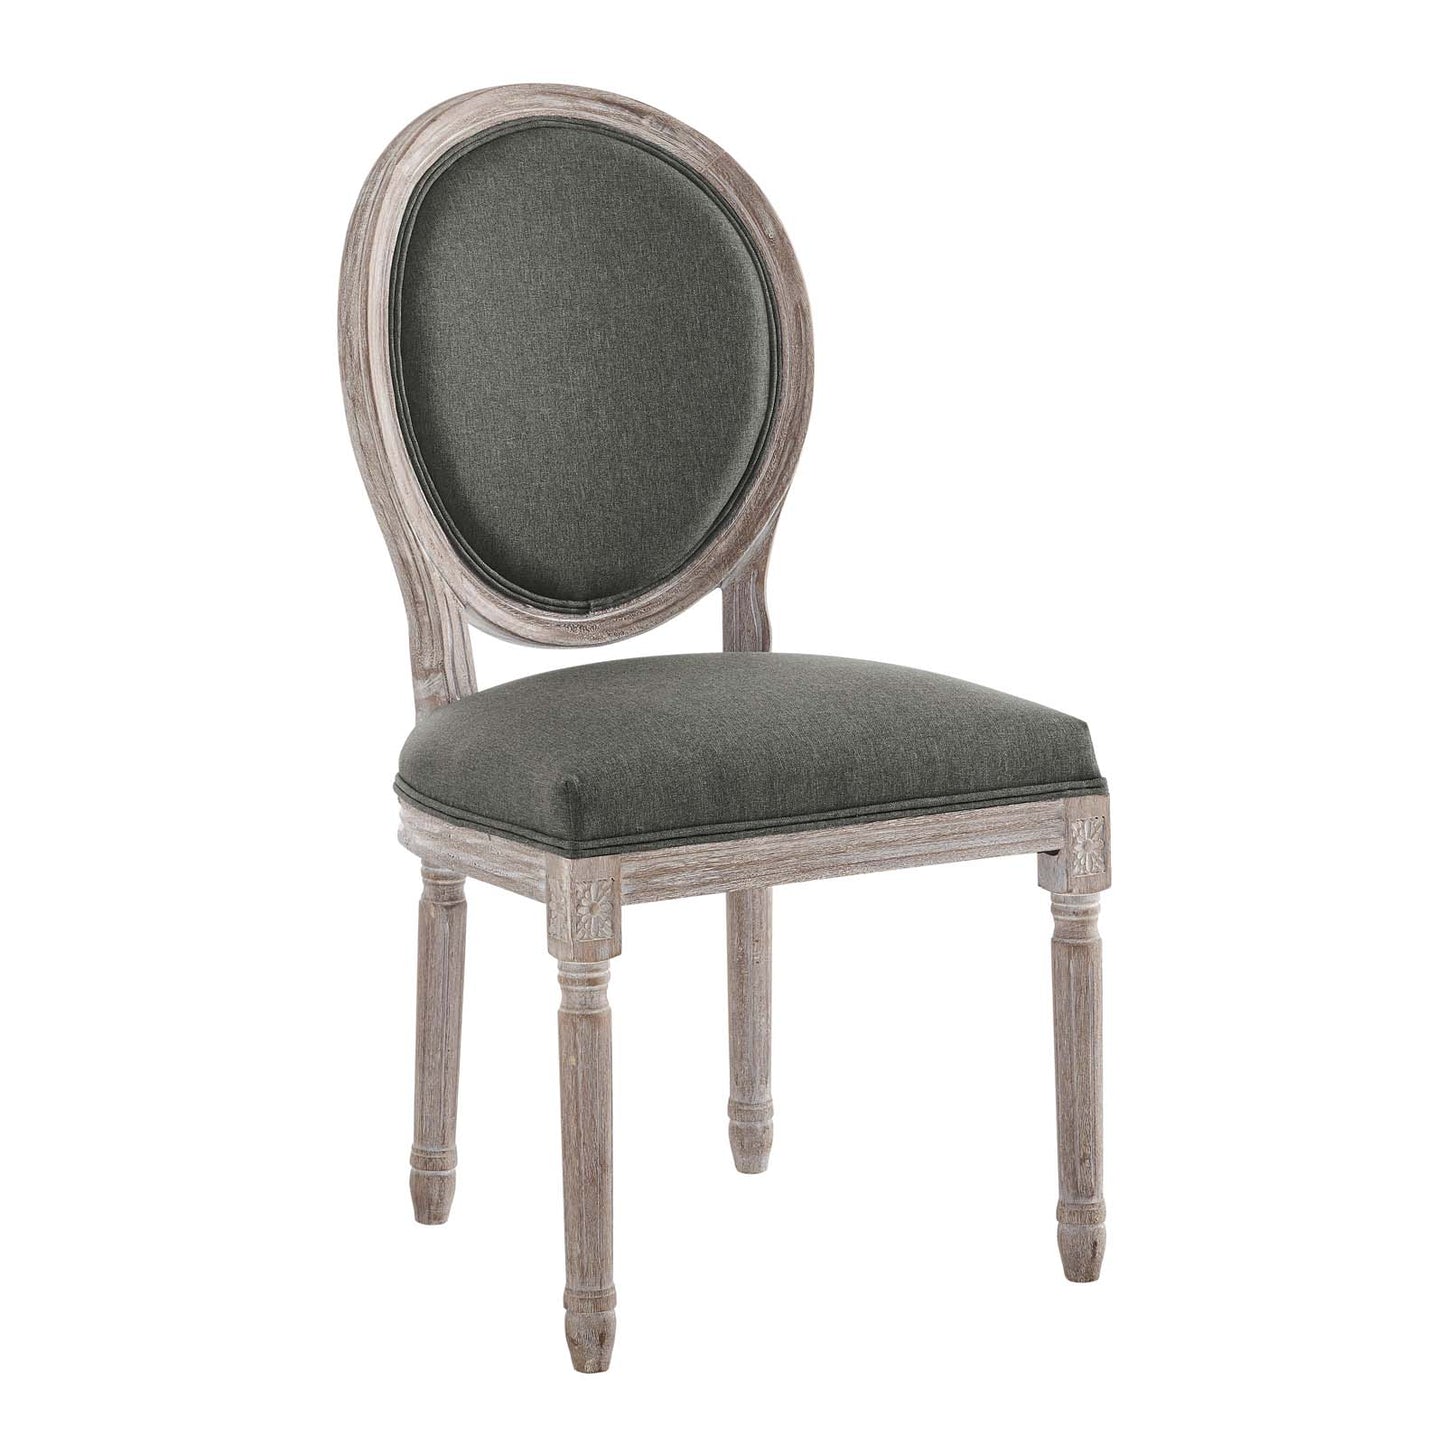 Emanate Vintage French Upholstered Fabric Dining Side Chair Natural Gray EEI-4667-NAT-GRY